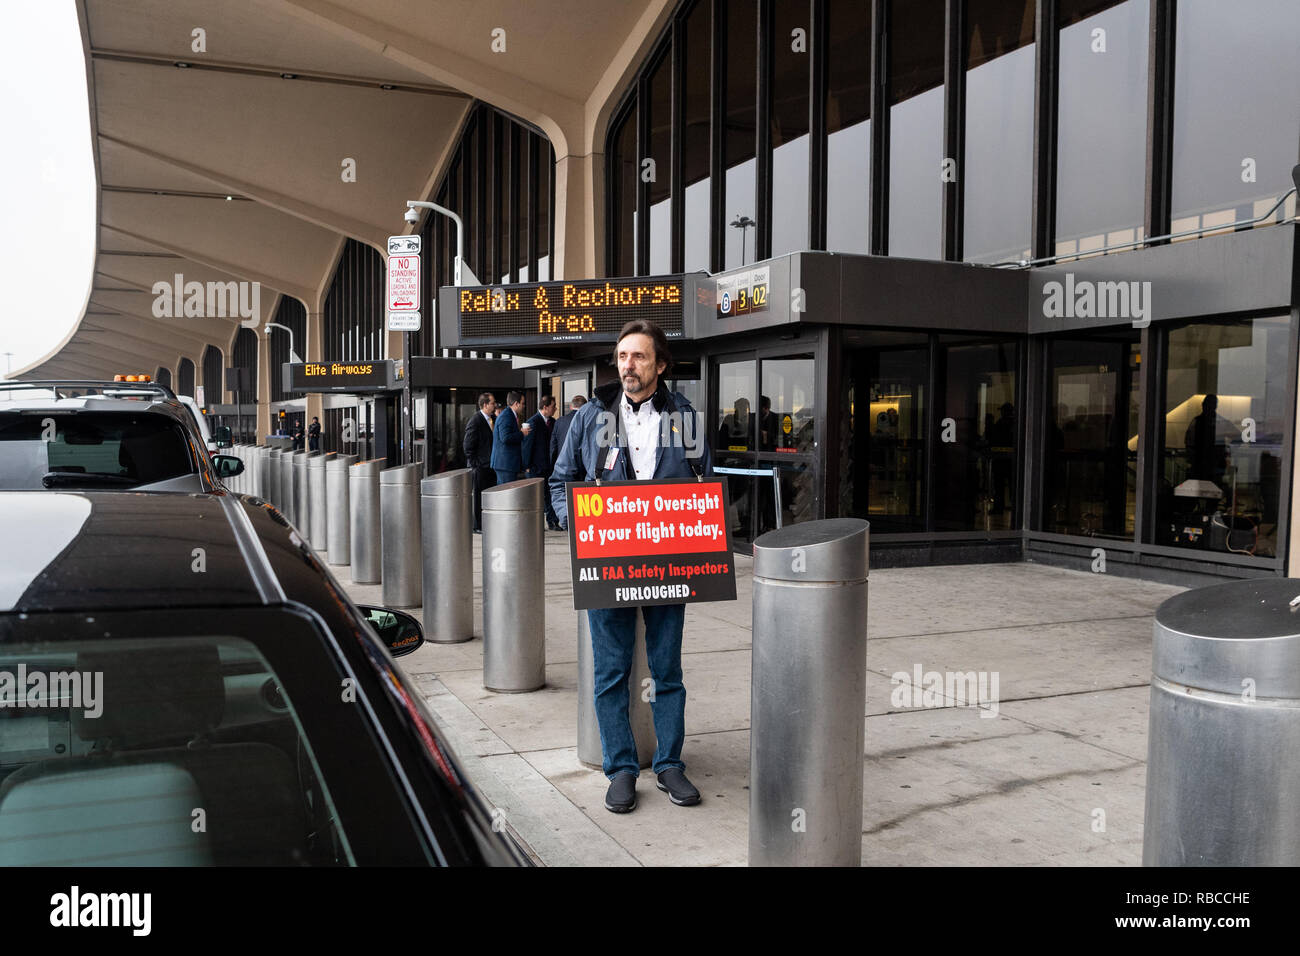 Protester seen outside a press conference in Terminal B at Newark Liberty International Airport with a placard telling people that FAA Safety Inspectors have been furloughed in Newark, New Jersey. Stock Photo